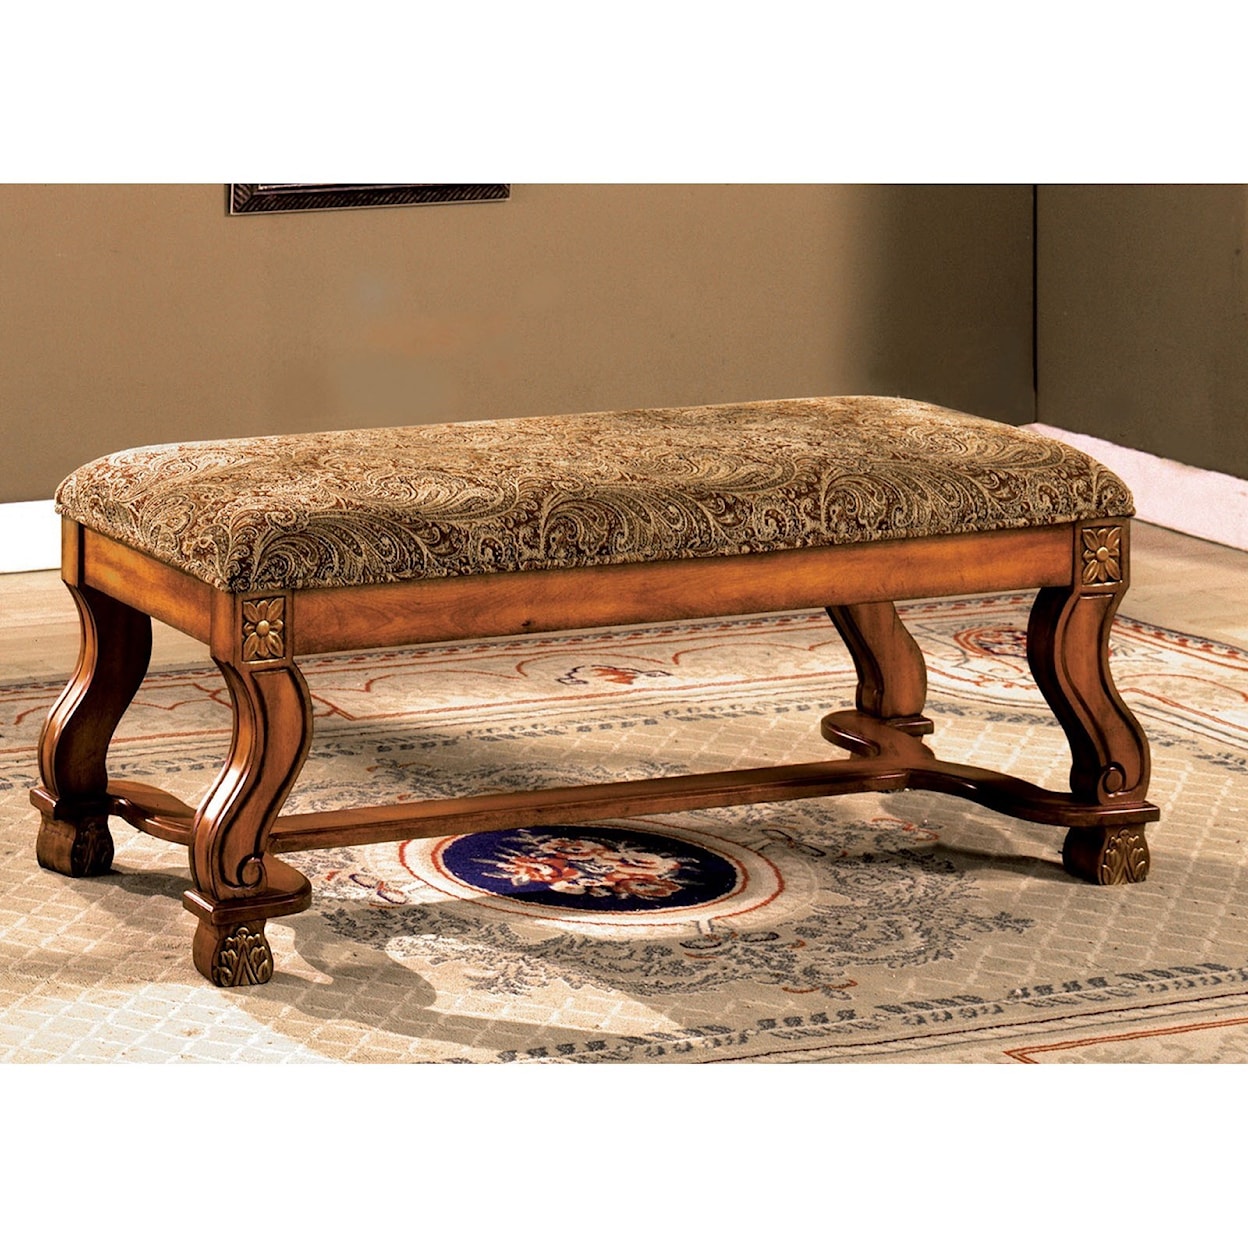 Furniture of America Vale Royal Bench